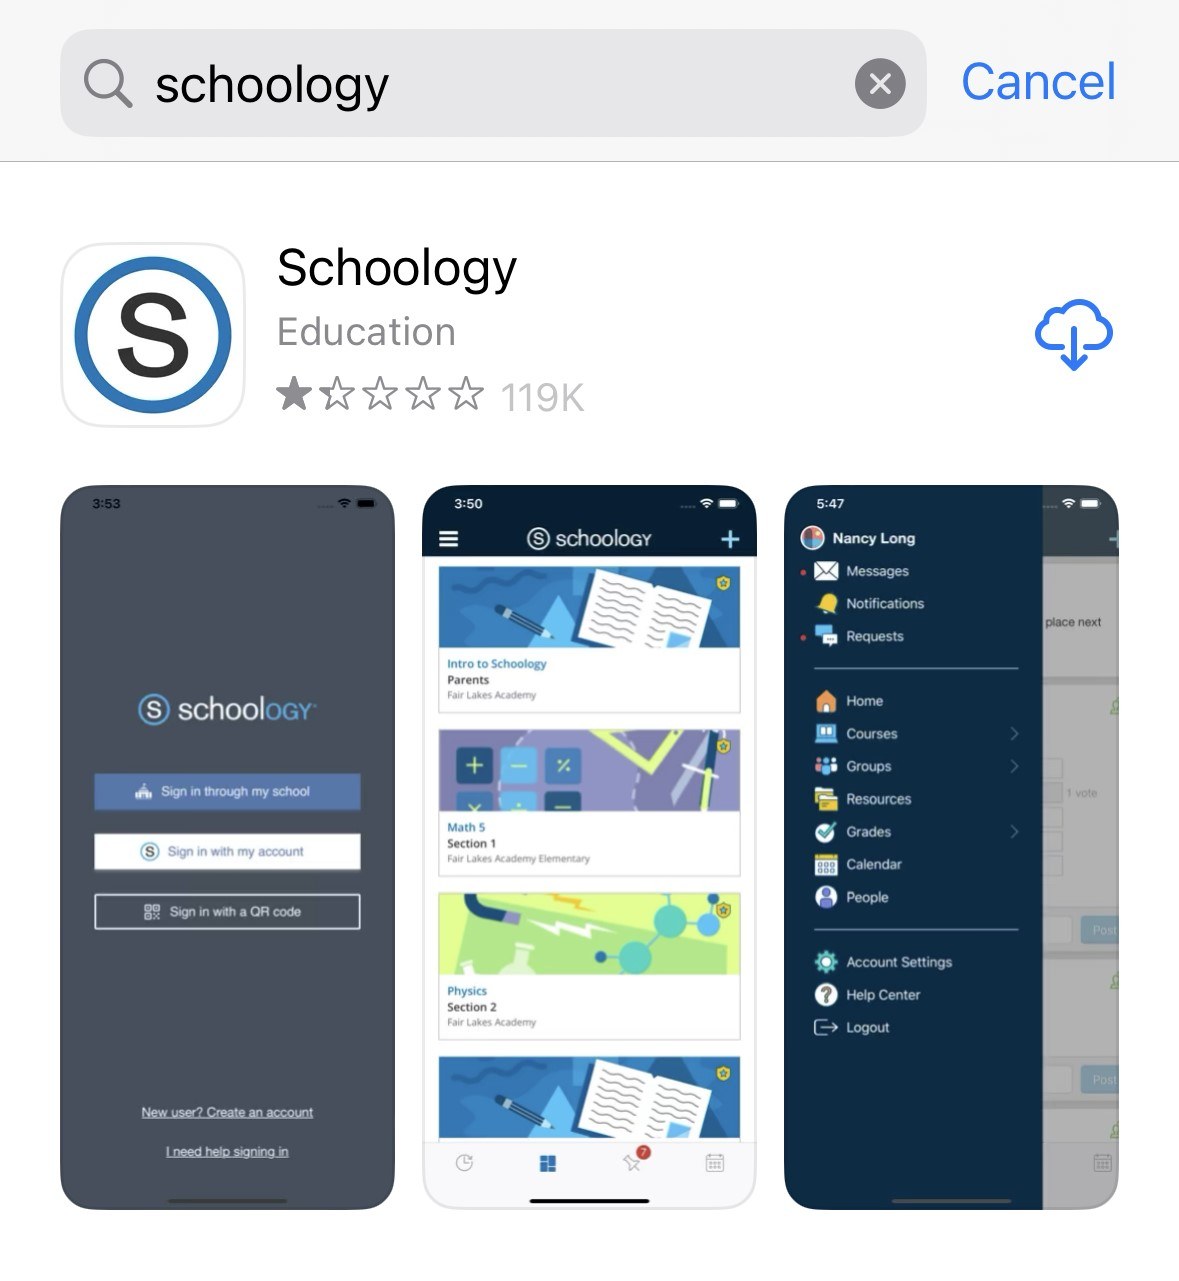 Step 1. Download the Schoology mobile app